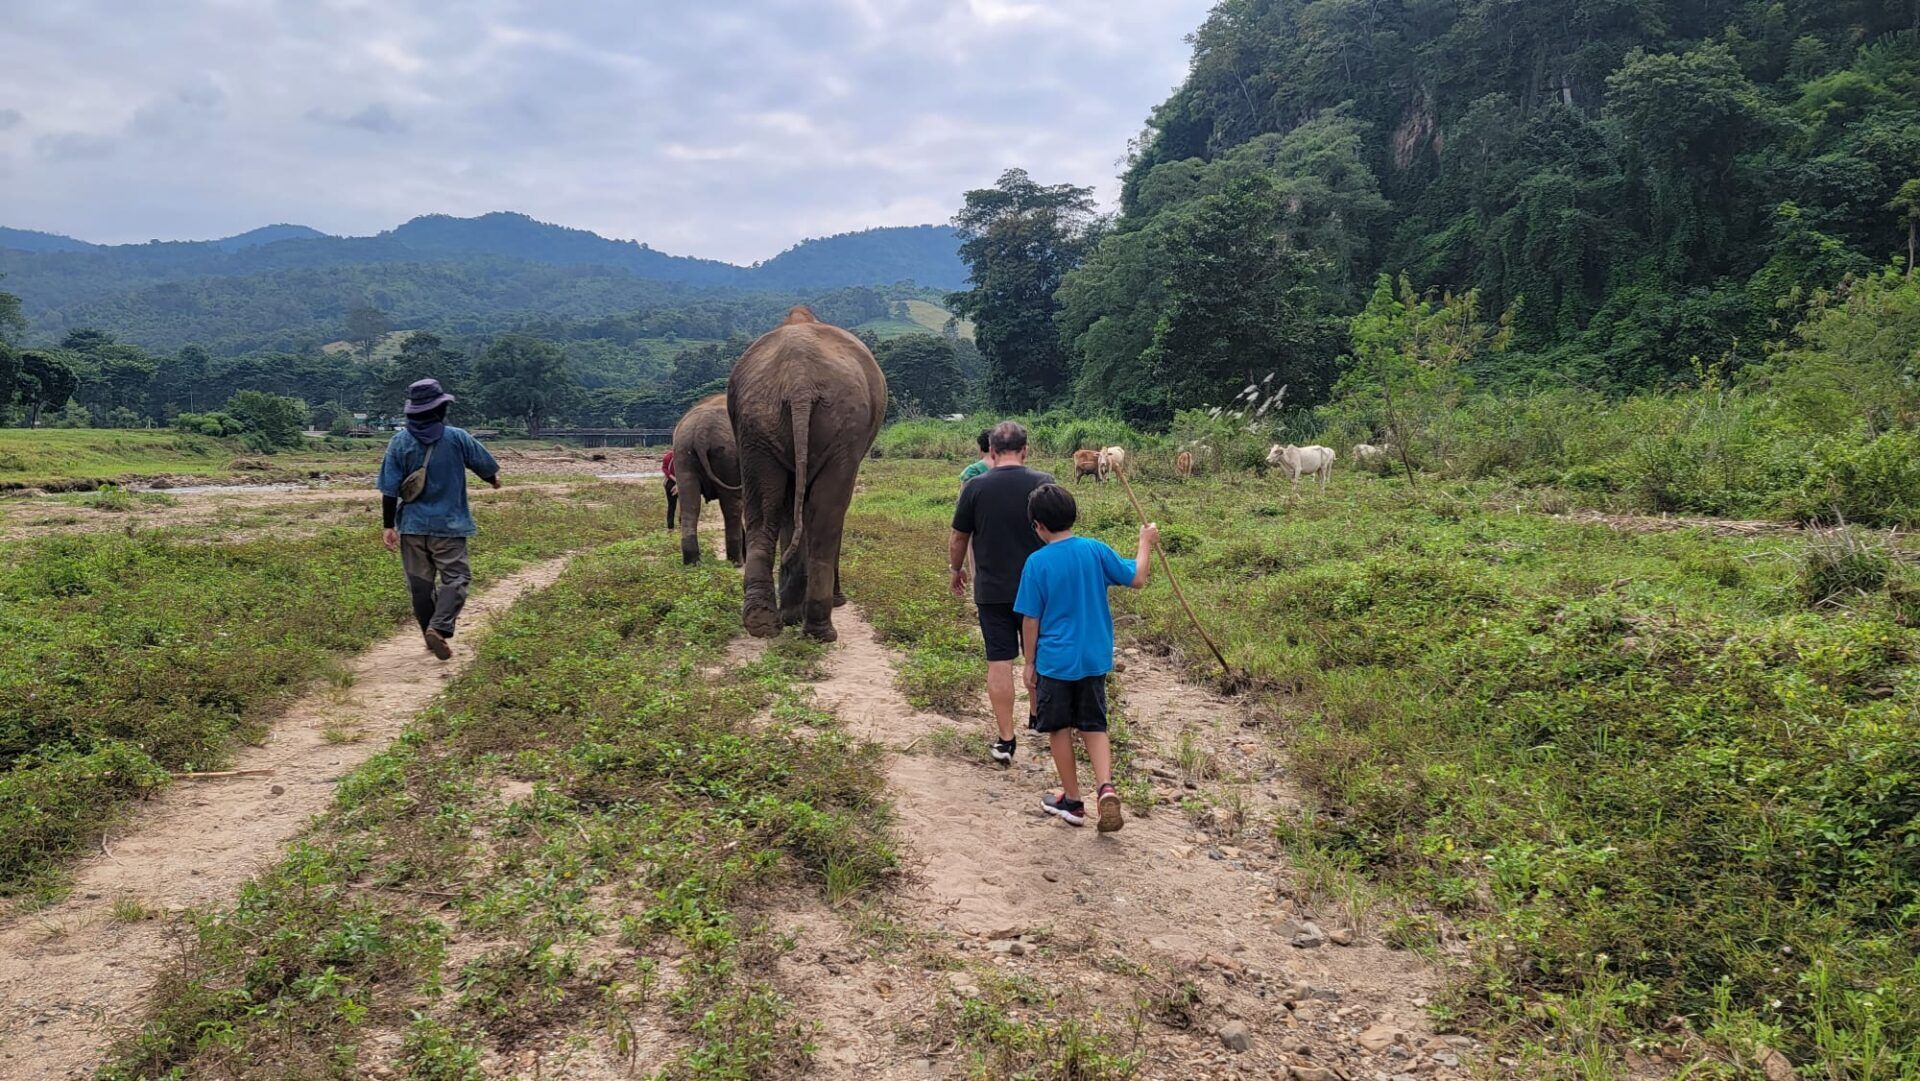 In the Elephant Freedom Project, a group of people embark on a walk with the majestic elephants.